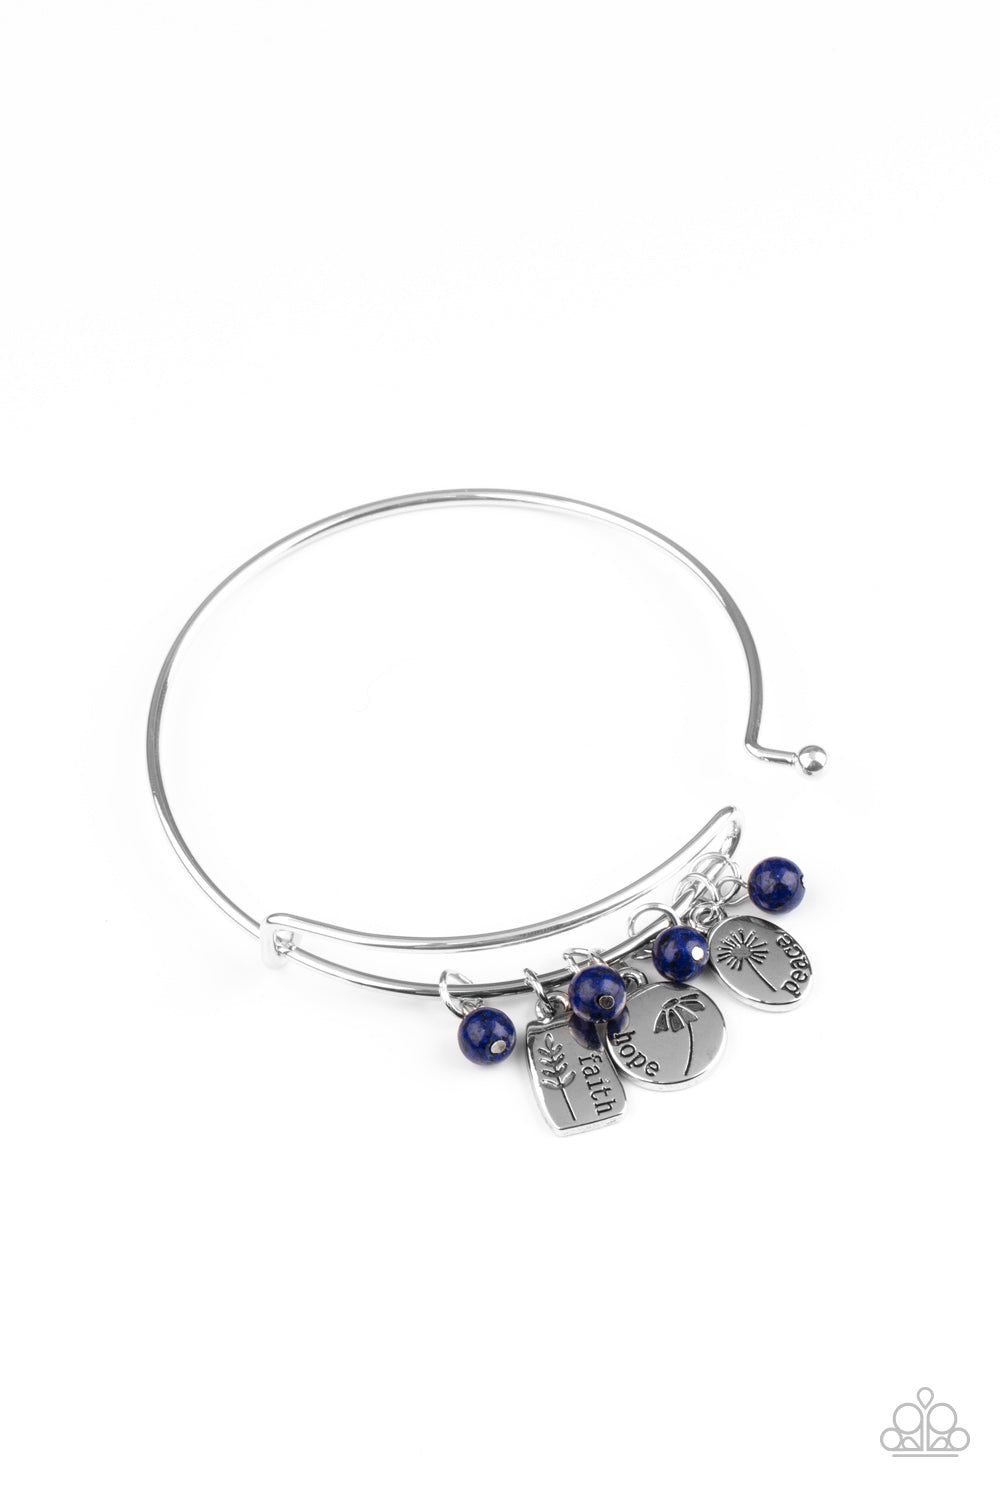 Paparazzi GROWING Strong - Blue Bracelet - A Finishing Touch Jewelry